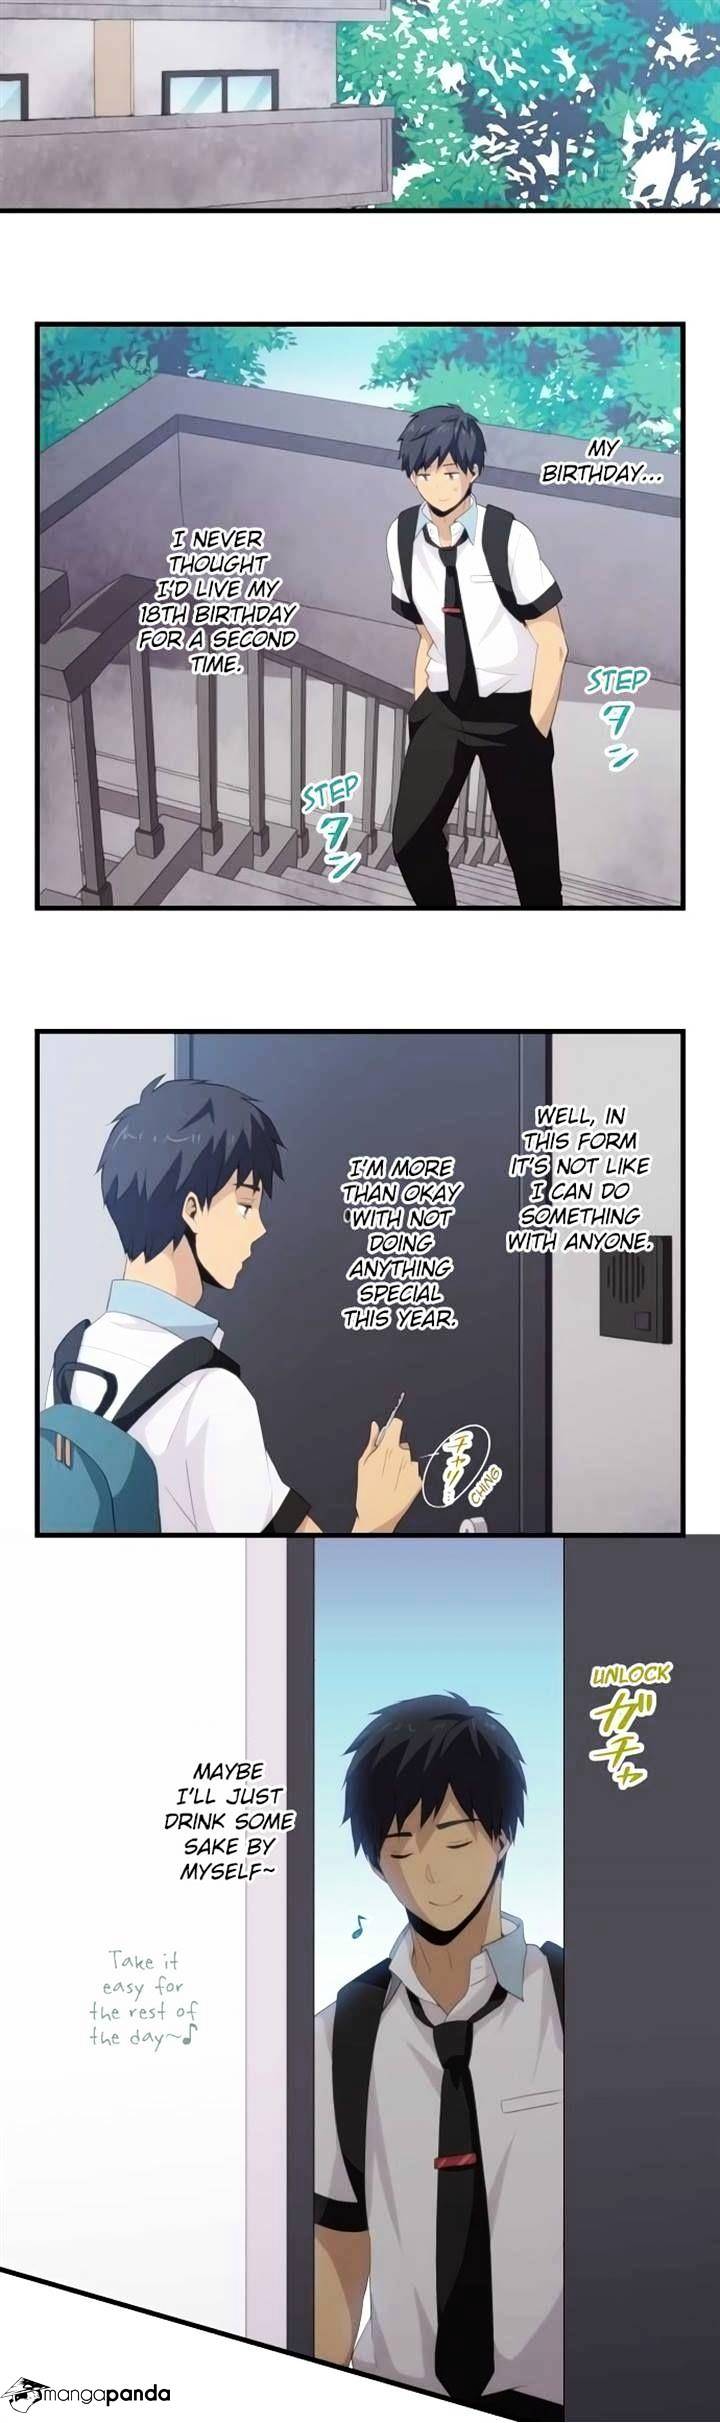 ReLIFE - Chapter 109.2 Page 11